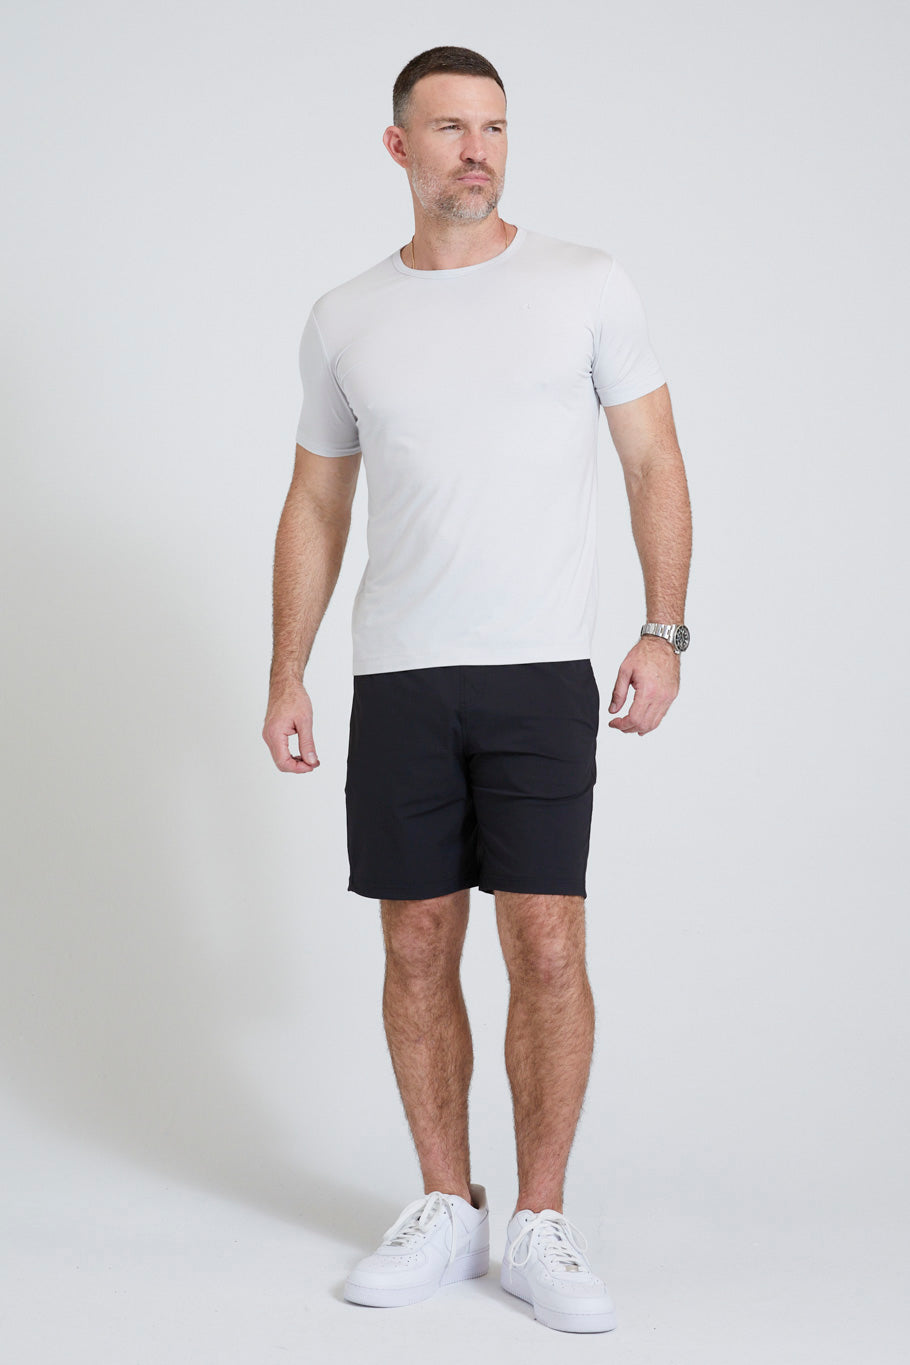 Image of the sussex tee in glacier gray ss23